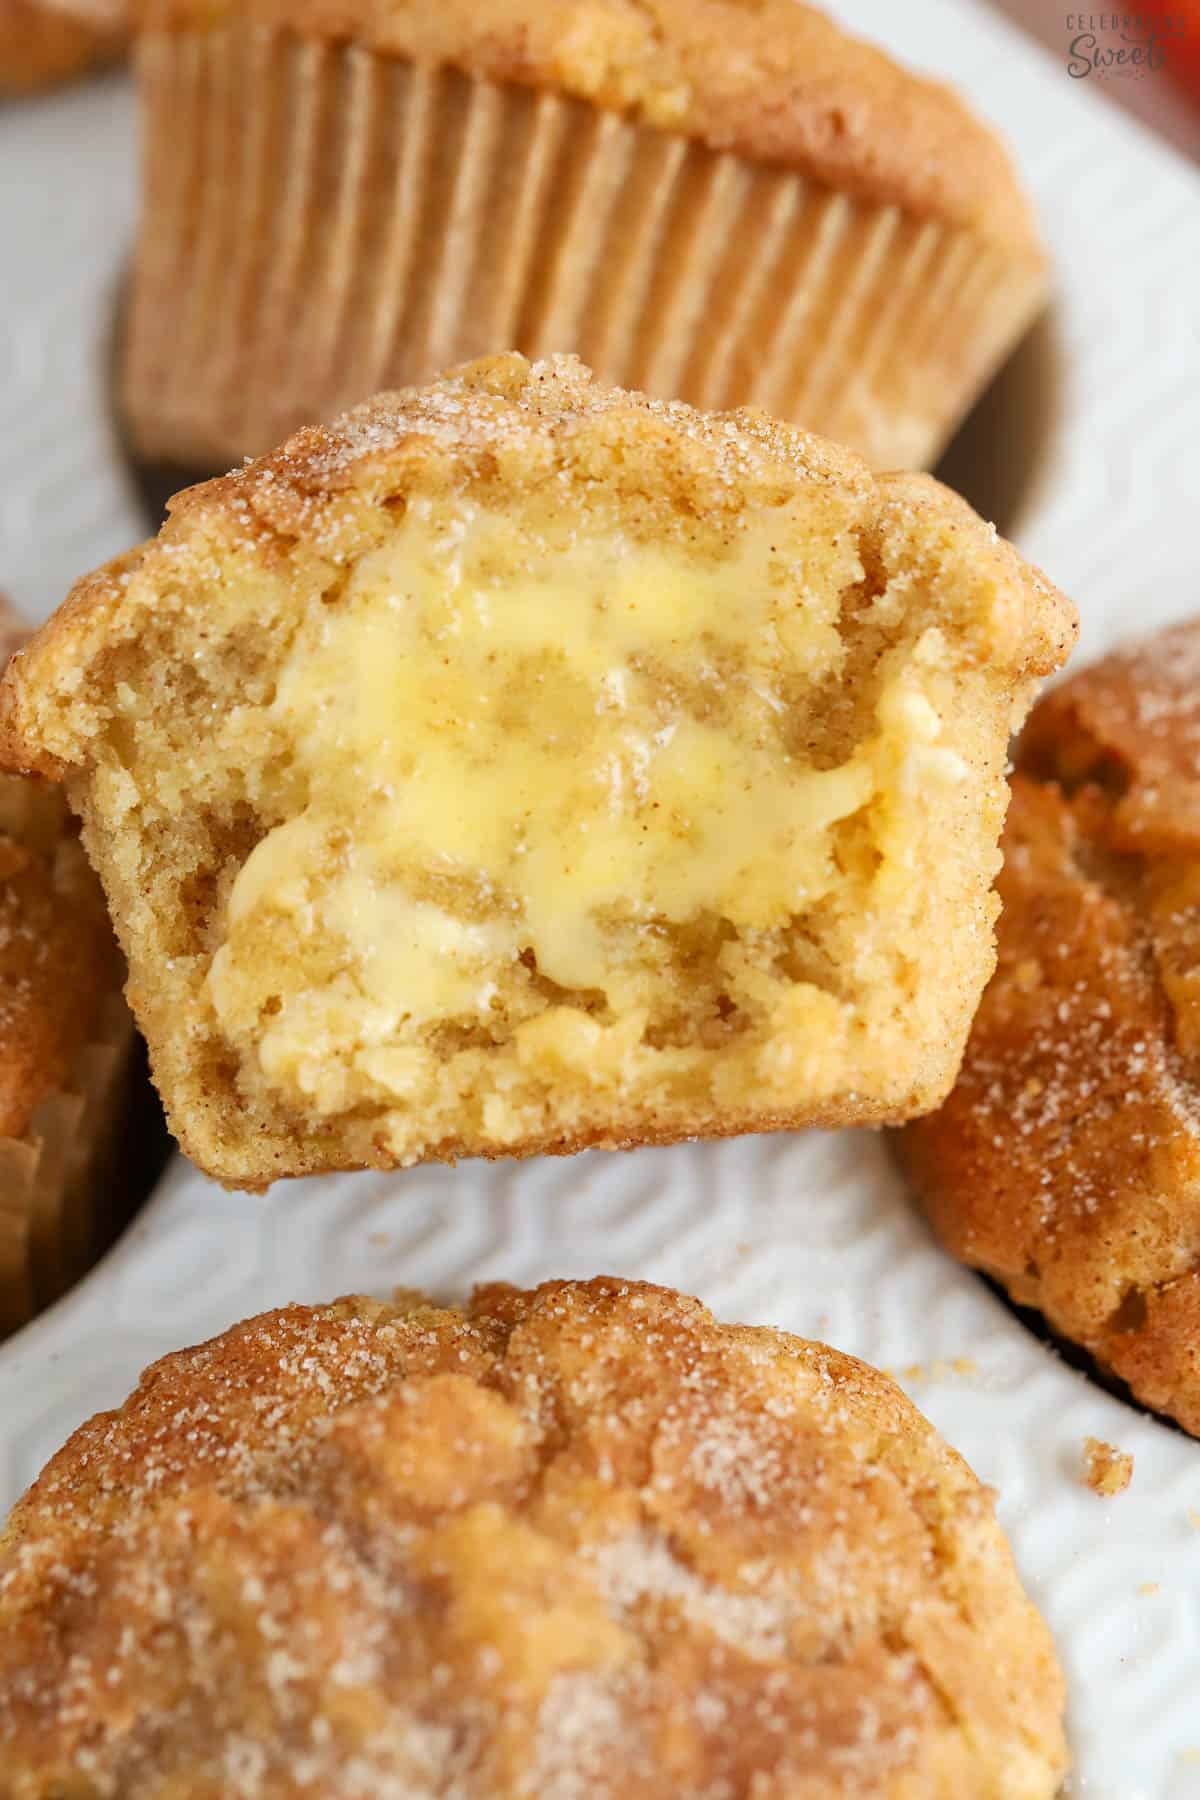 Apple cinnamon muffin cut in half and topped with butter.